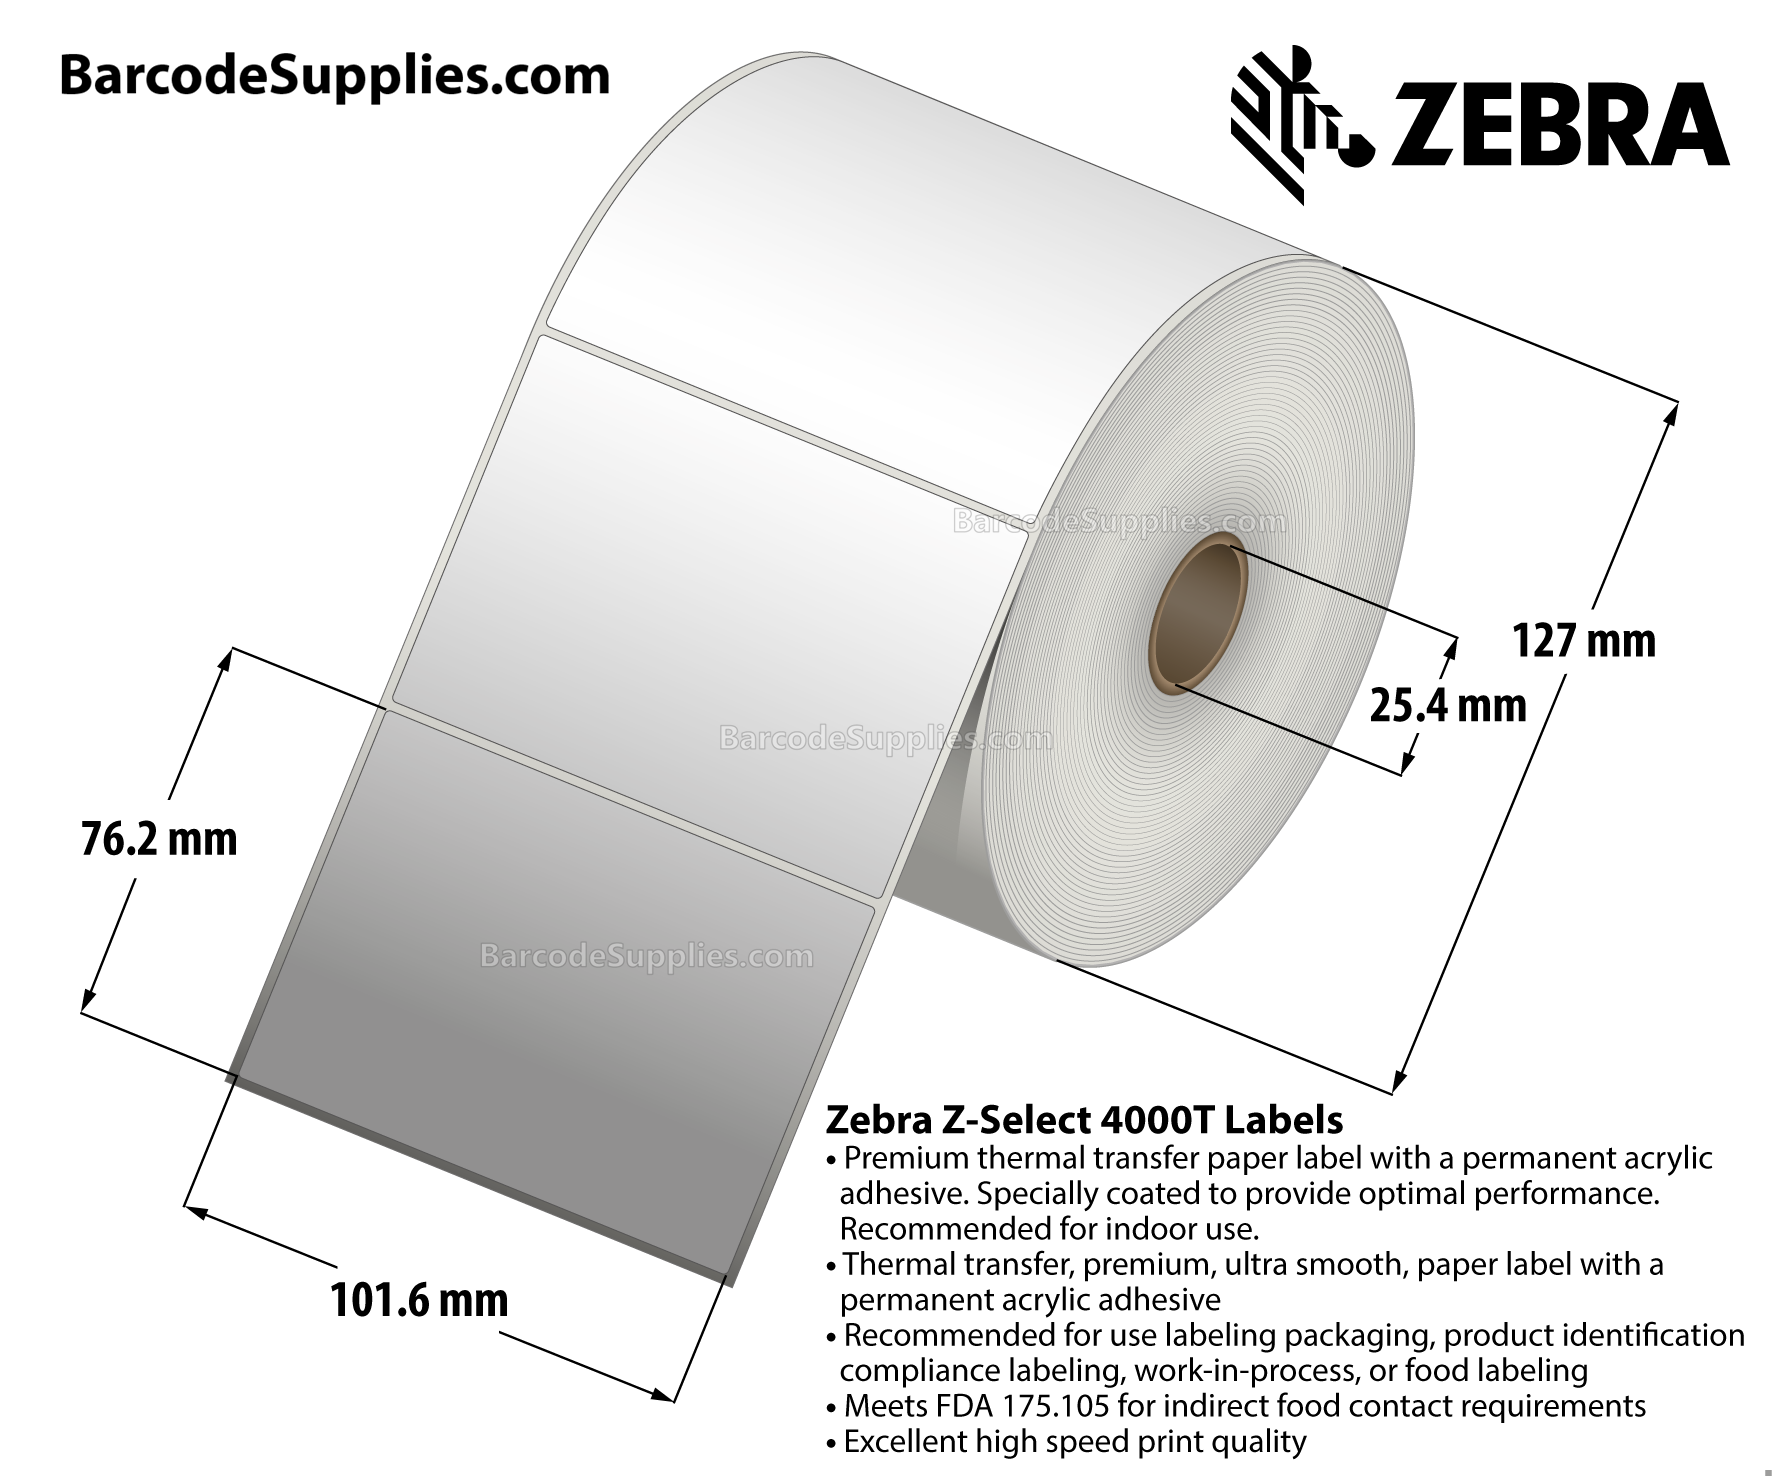 4 x 3 Thermal Transfer White Z-Select 4000T Labels With Permanent Adhesive - Not Perforated - 810 Labels Per Roll - Carton Of 4 Rolls - 3240 Labels Total - MPN: 83262